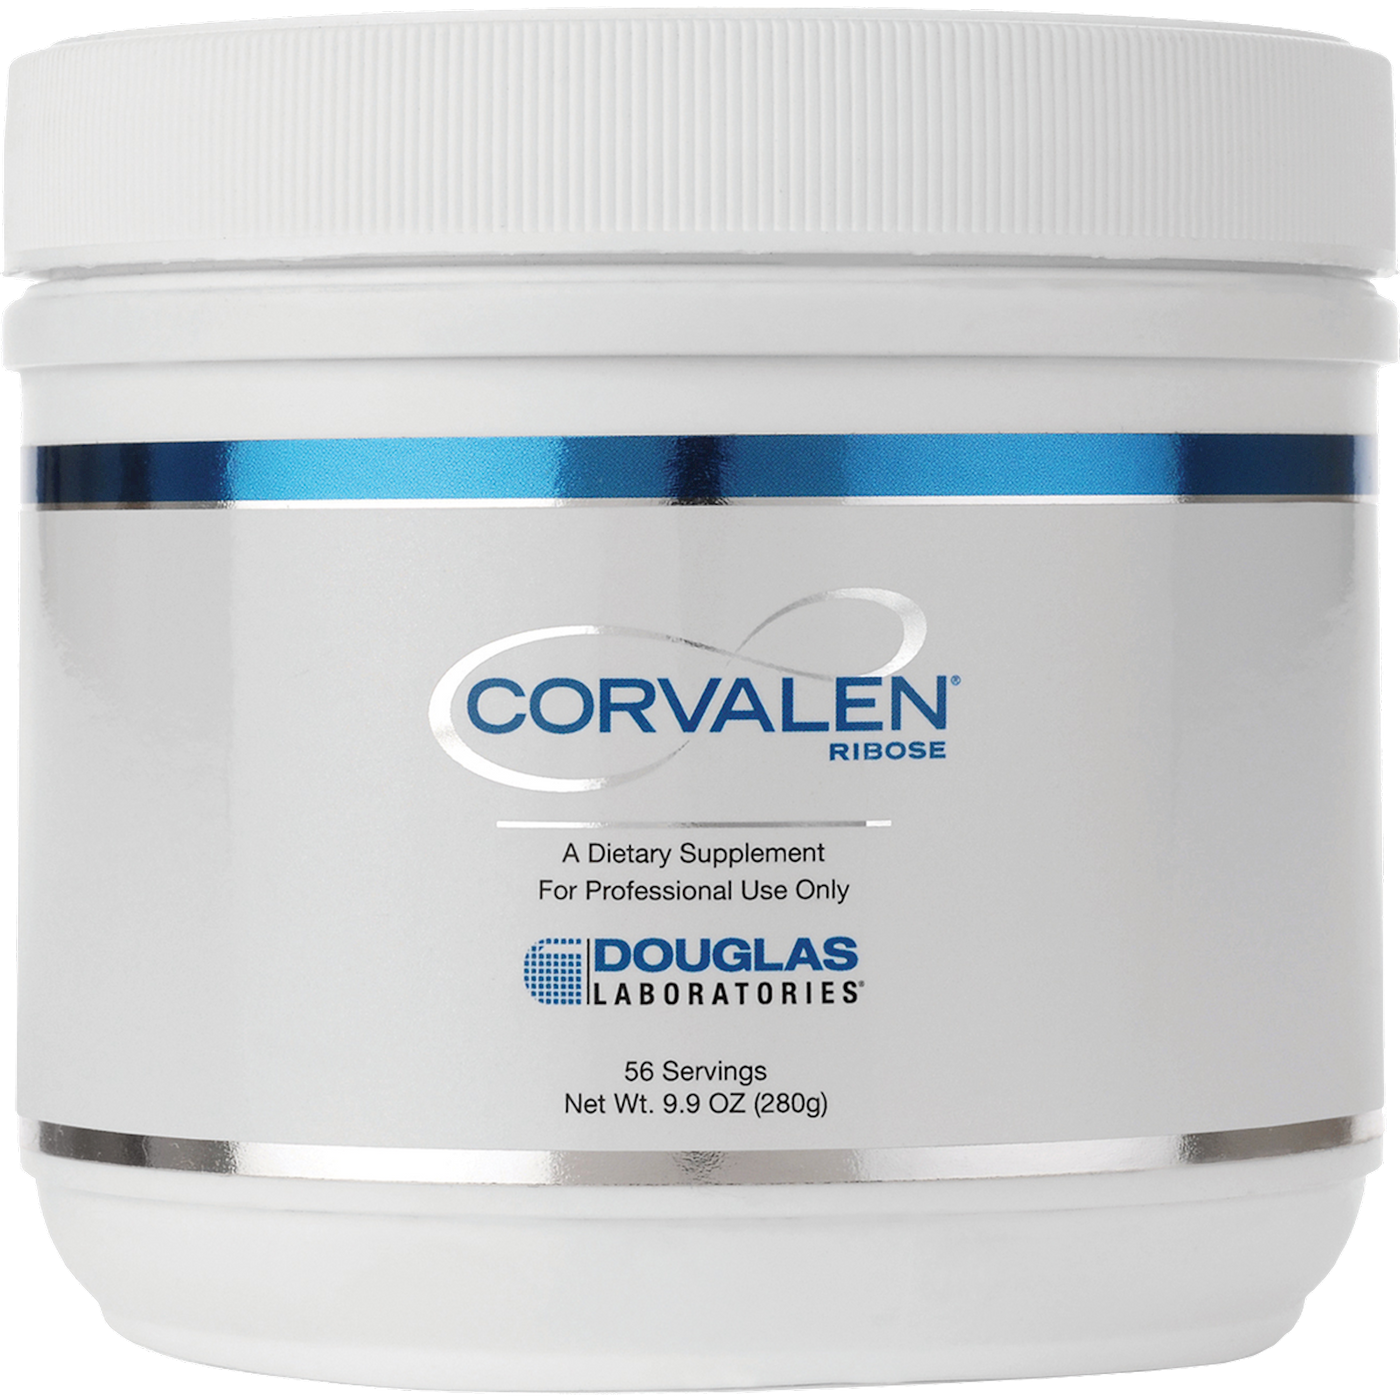 Corvalen Ribose ings Curated Wellness